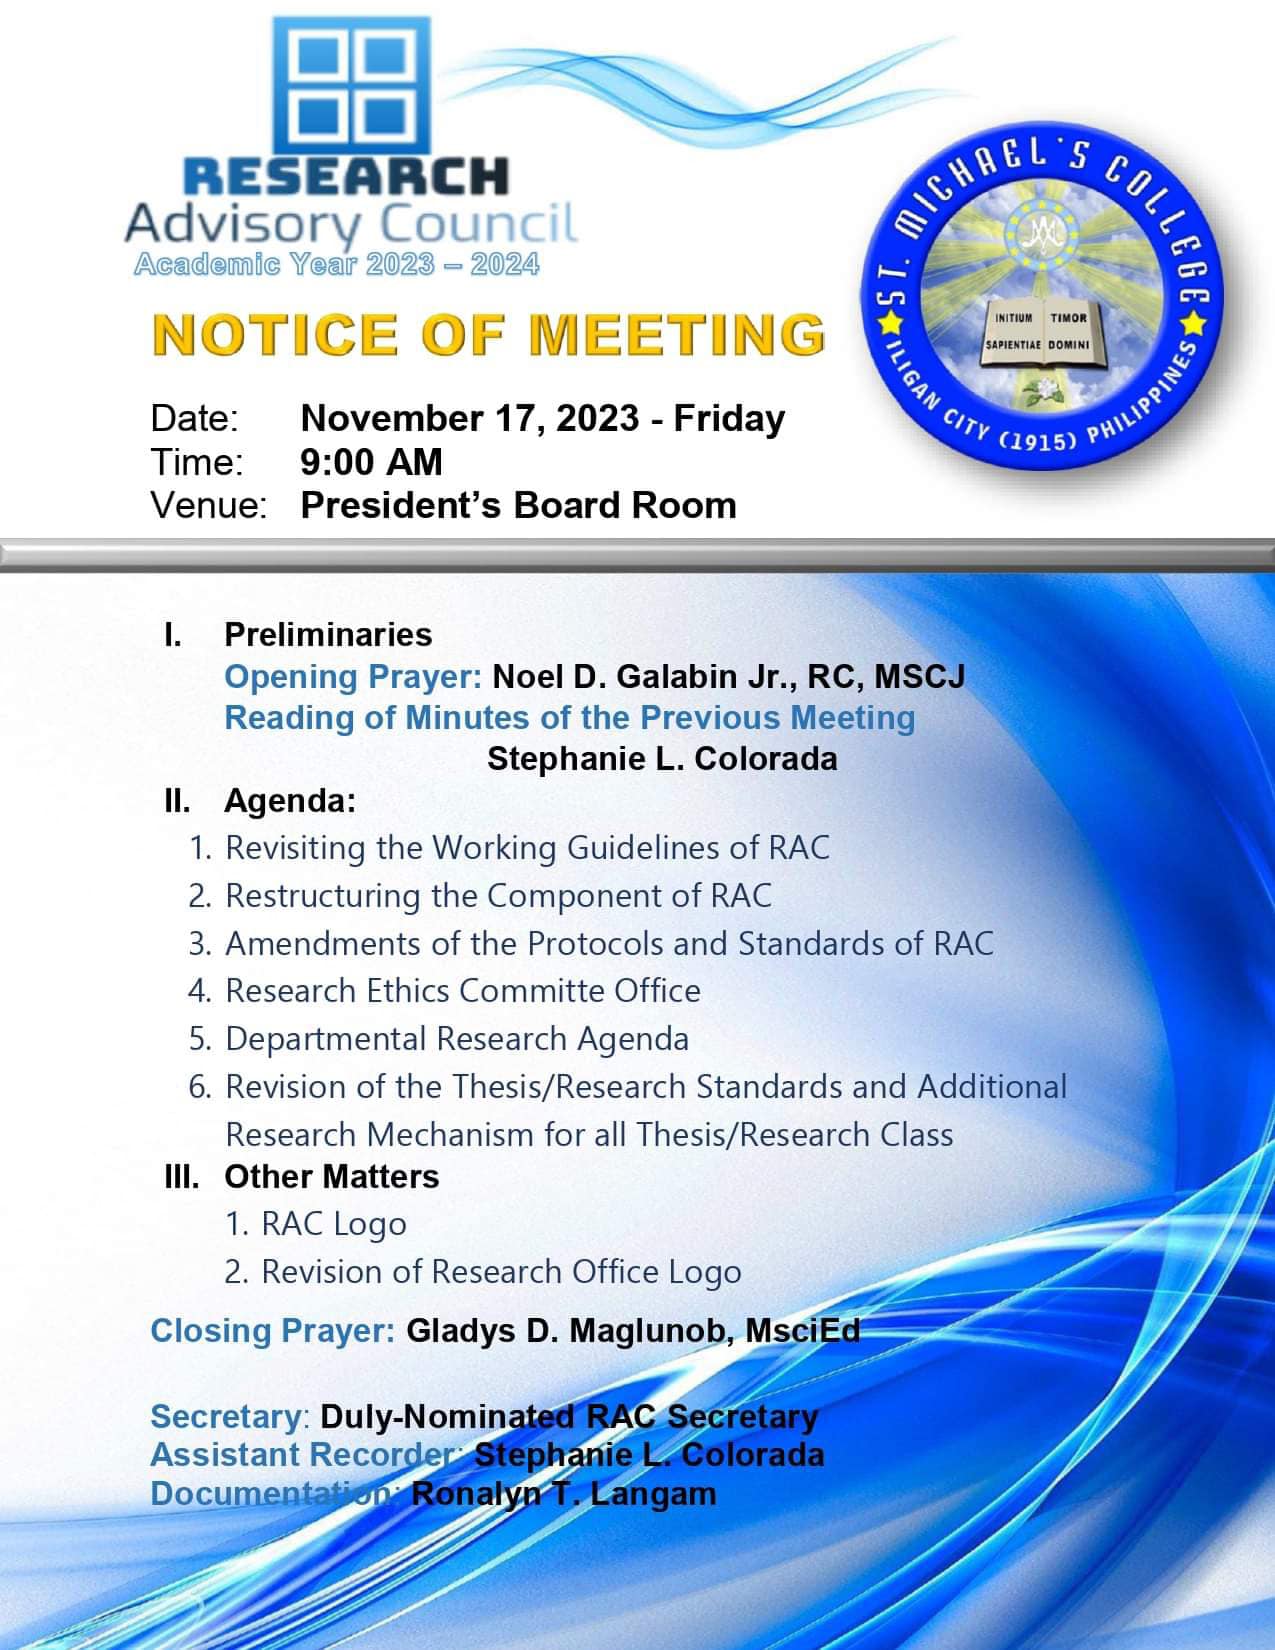 You are currently viewing Research Advisory Council Meeting on November 17, 2023